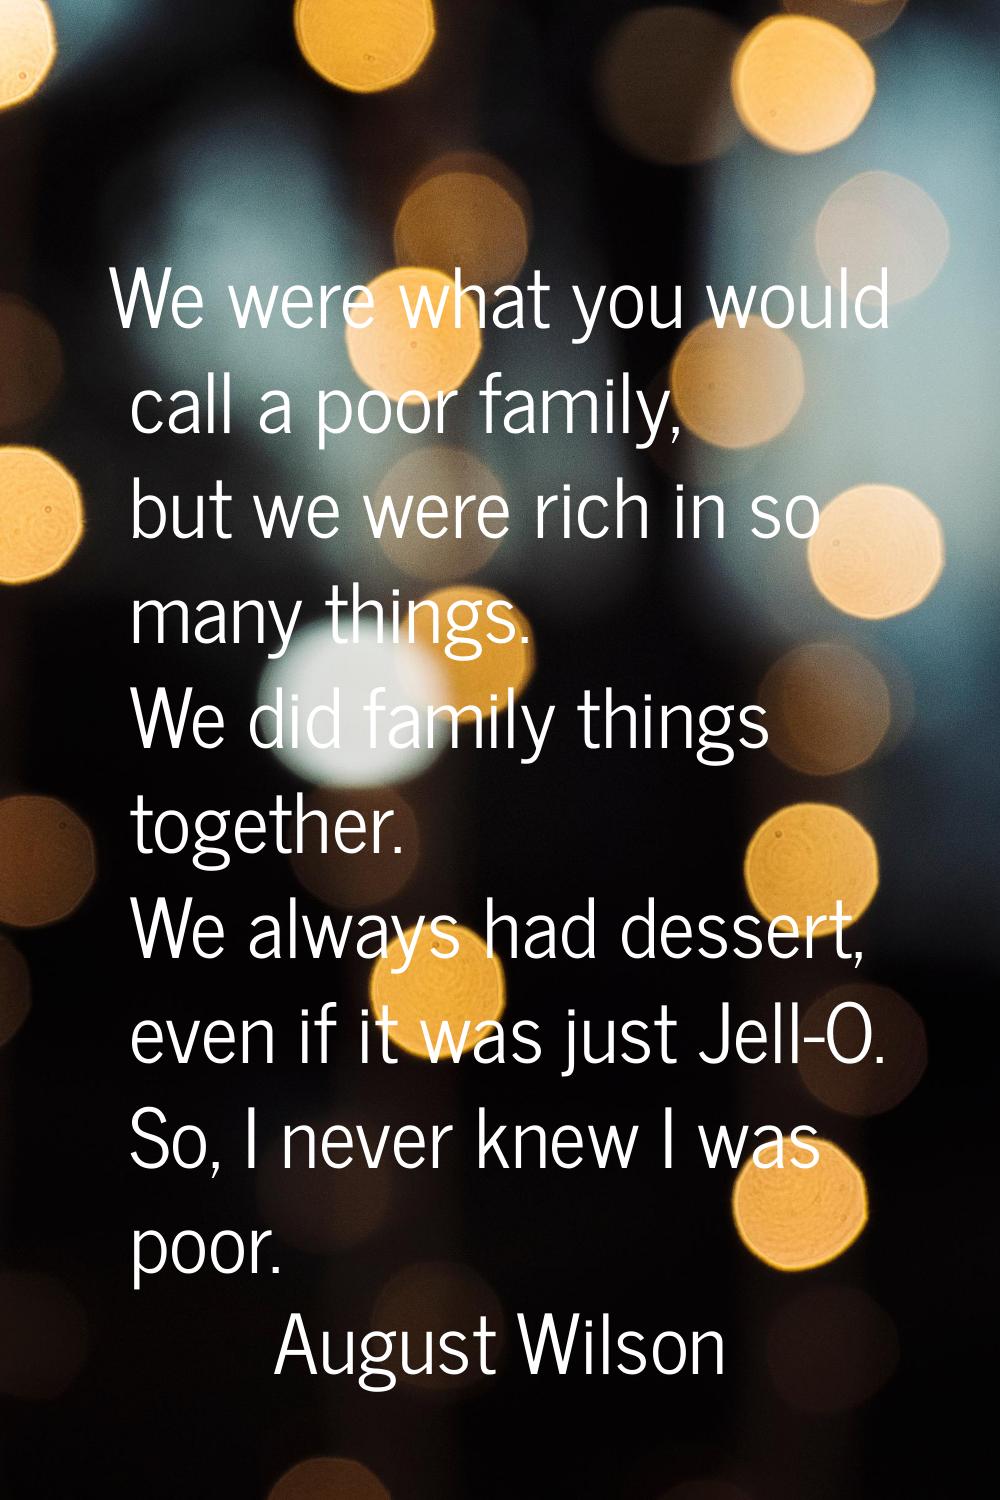 We were what you would call a poor family, but we were rich in so many things. We did family things